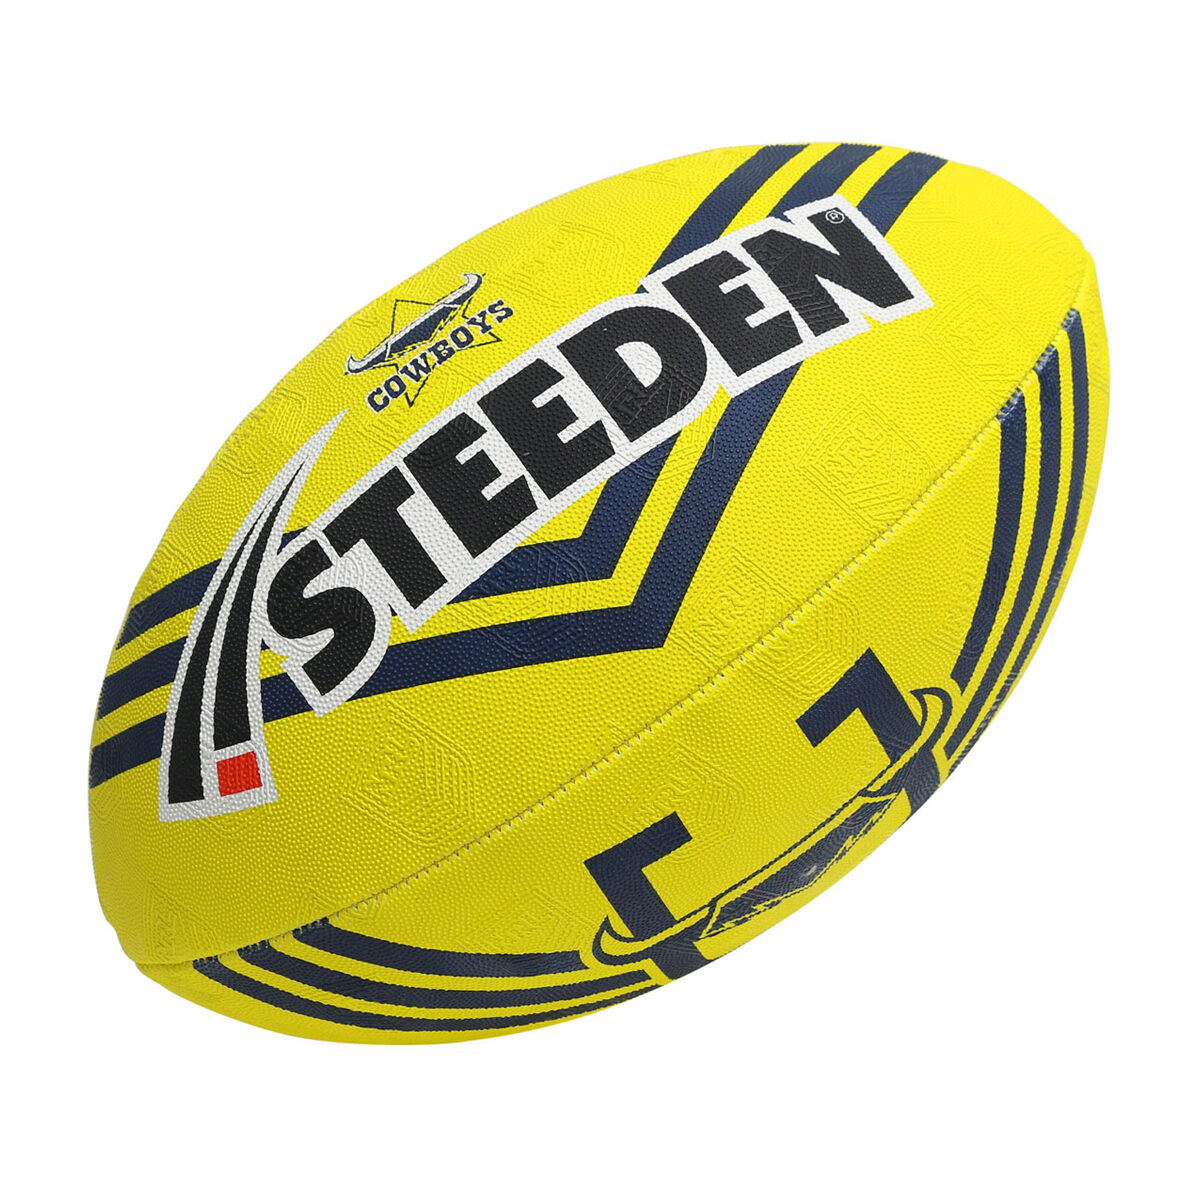 Rugby League Gear, NRL Merchandise, Boots & more